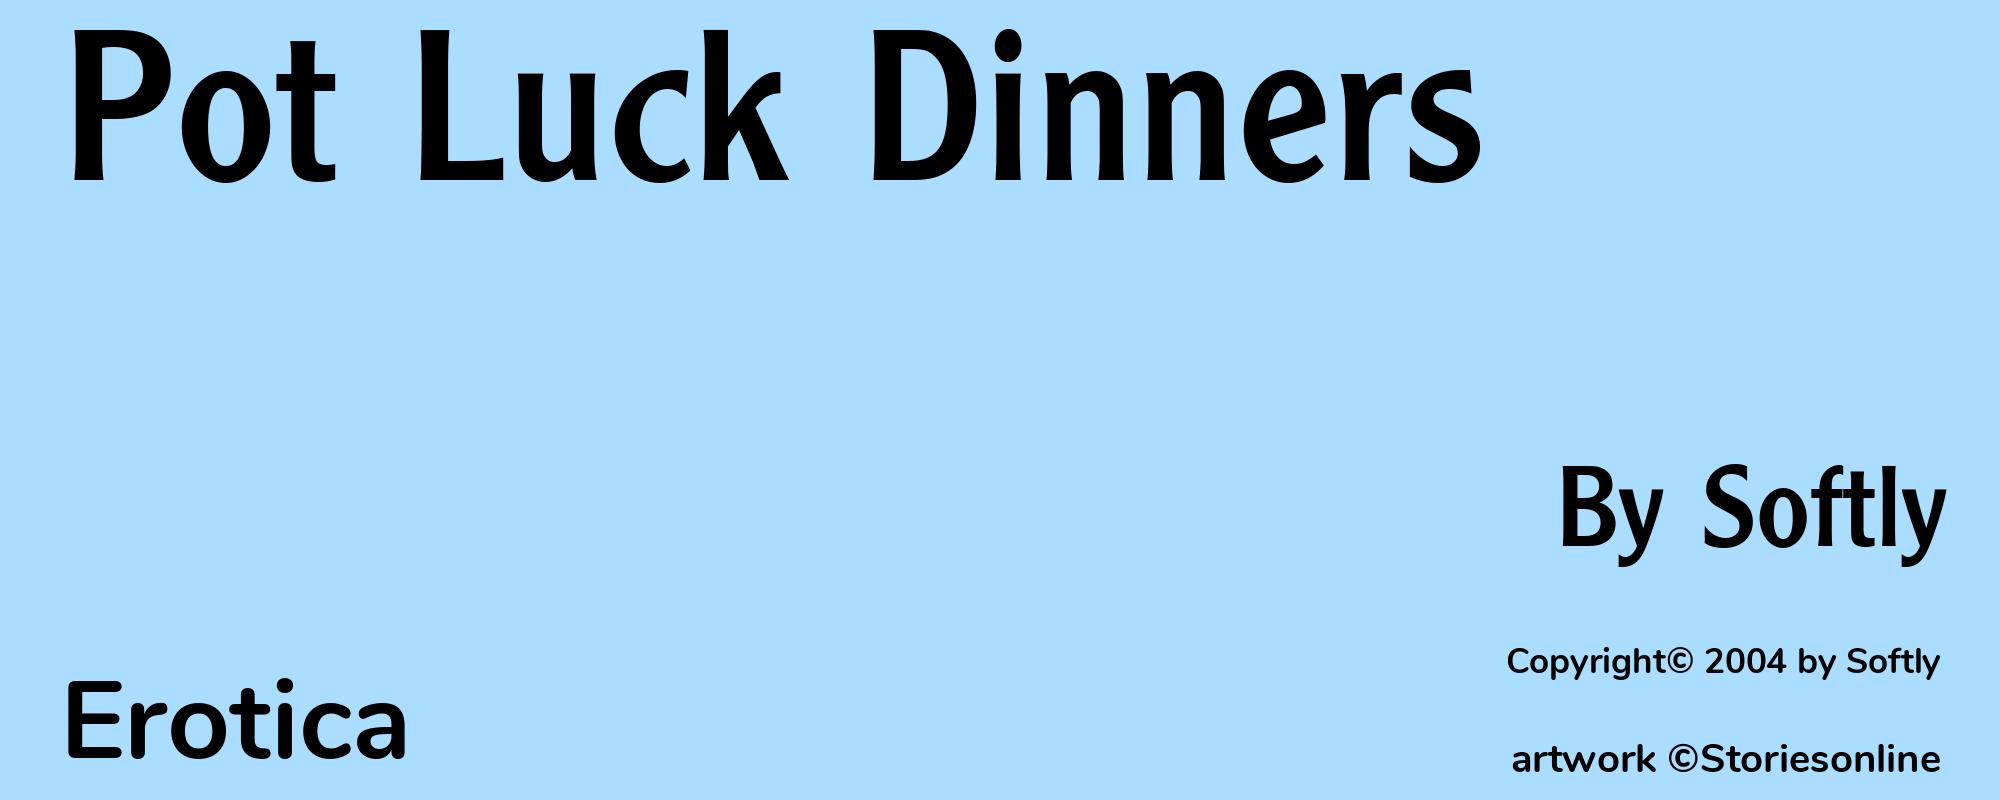 Pot Luck Dinners - Cover